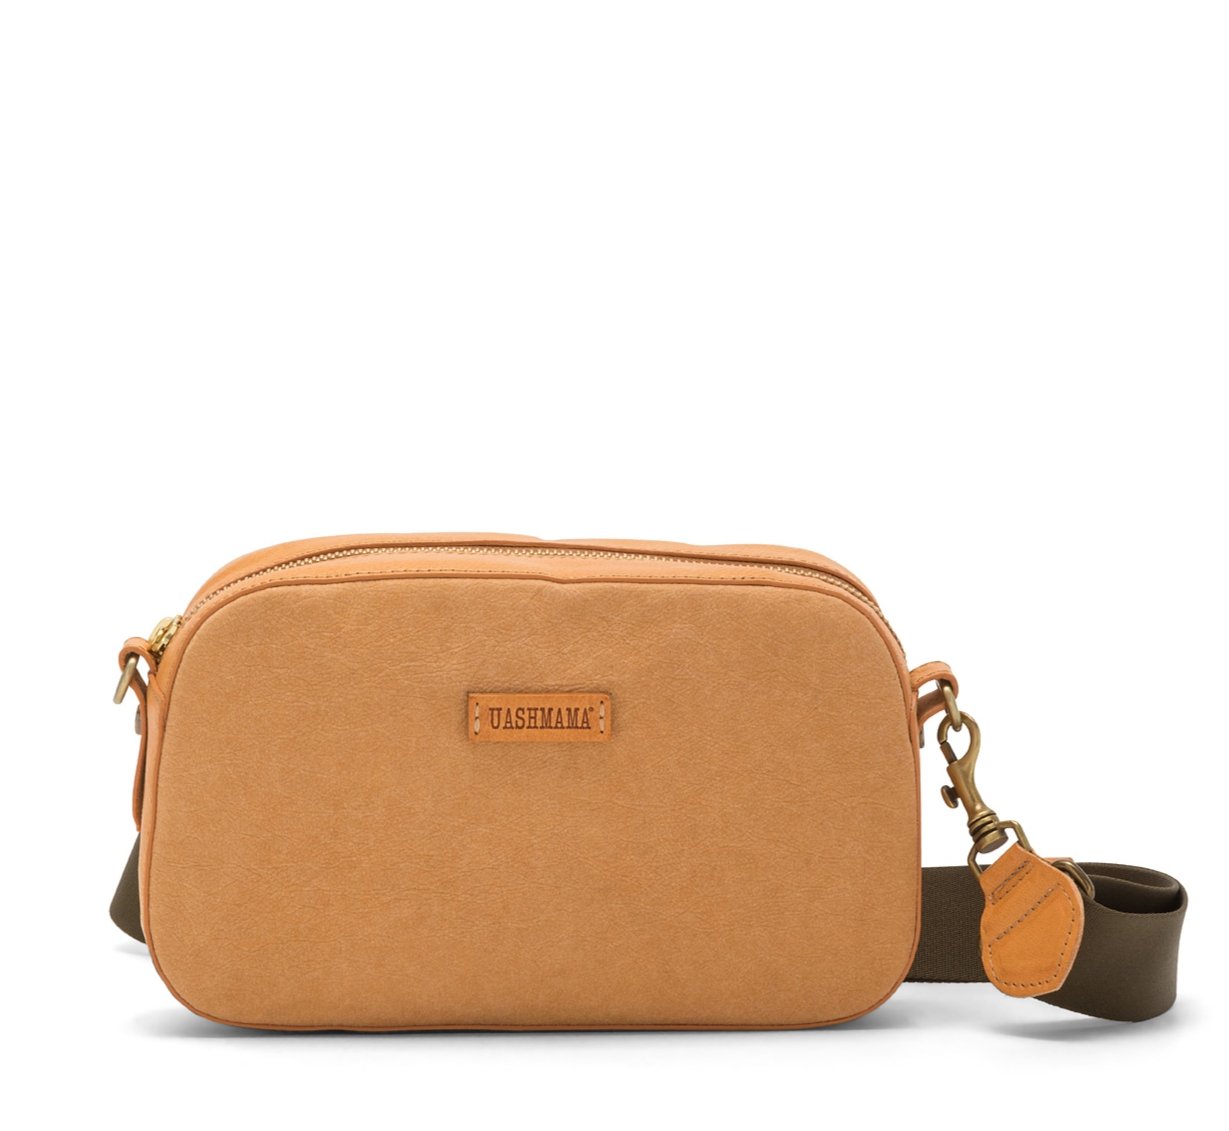 A washable paper cross-body bag is shown with a front tab bearing the UASHMAMA logo in a small font. The bag is shown in tan, with a khaki cotton strap with antique brass hardware.